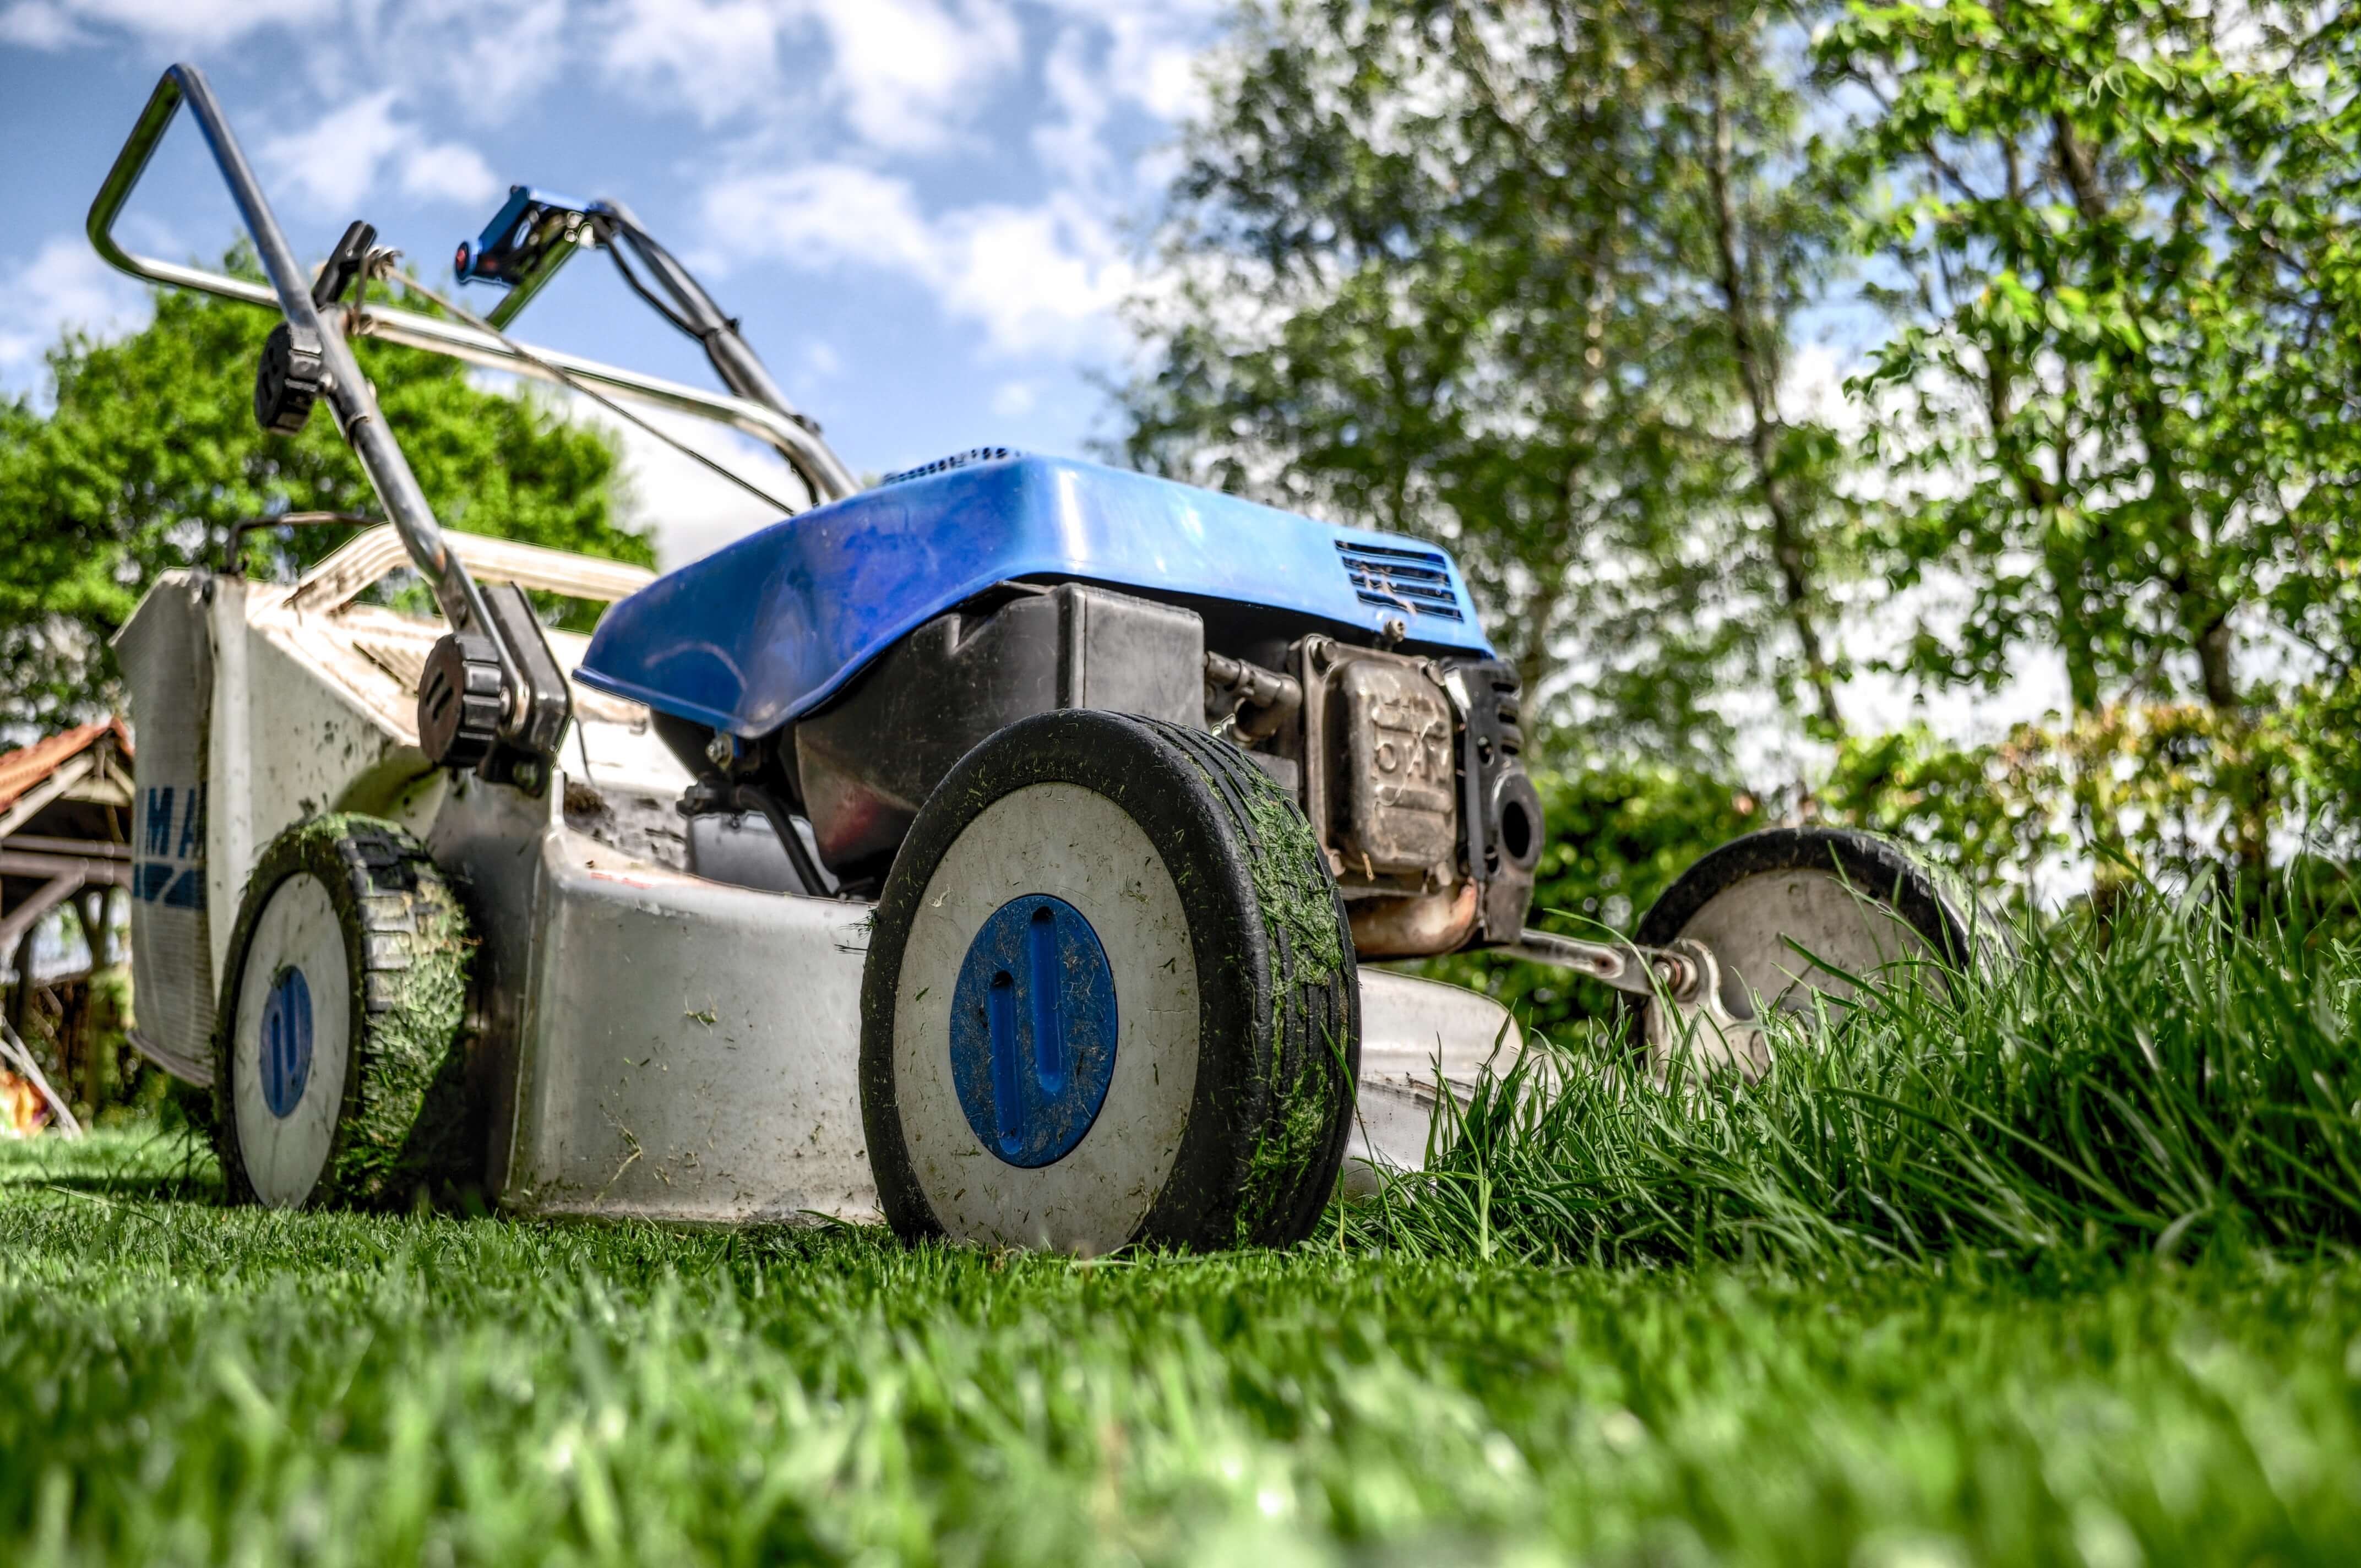 lawn care business names